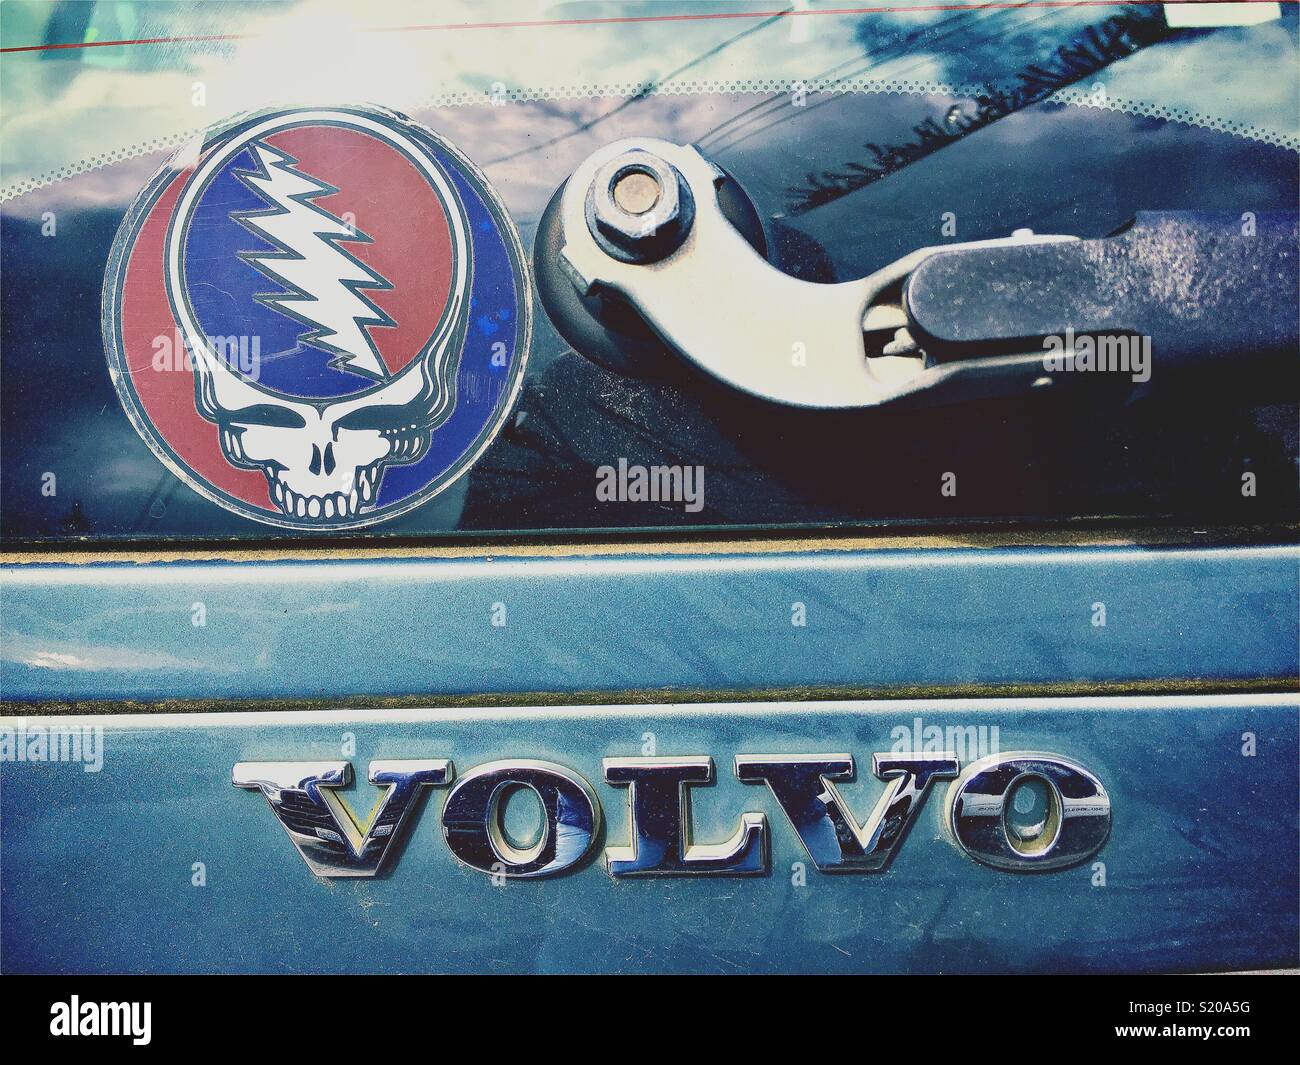 Grateful Dead sticker on the back window of a Volvo Stock Photo